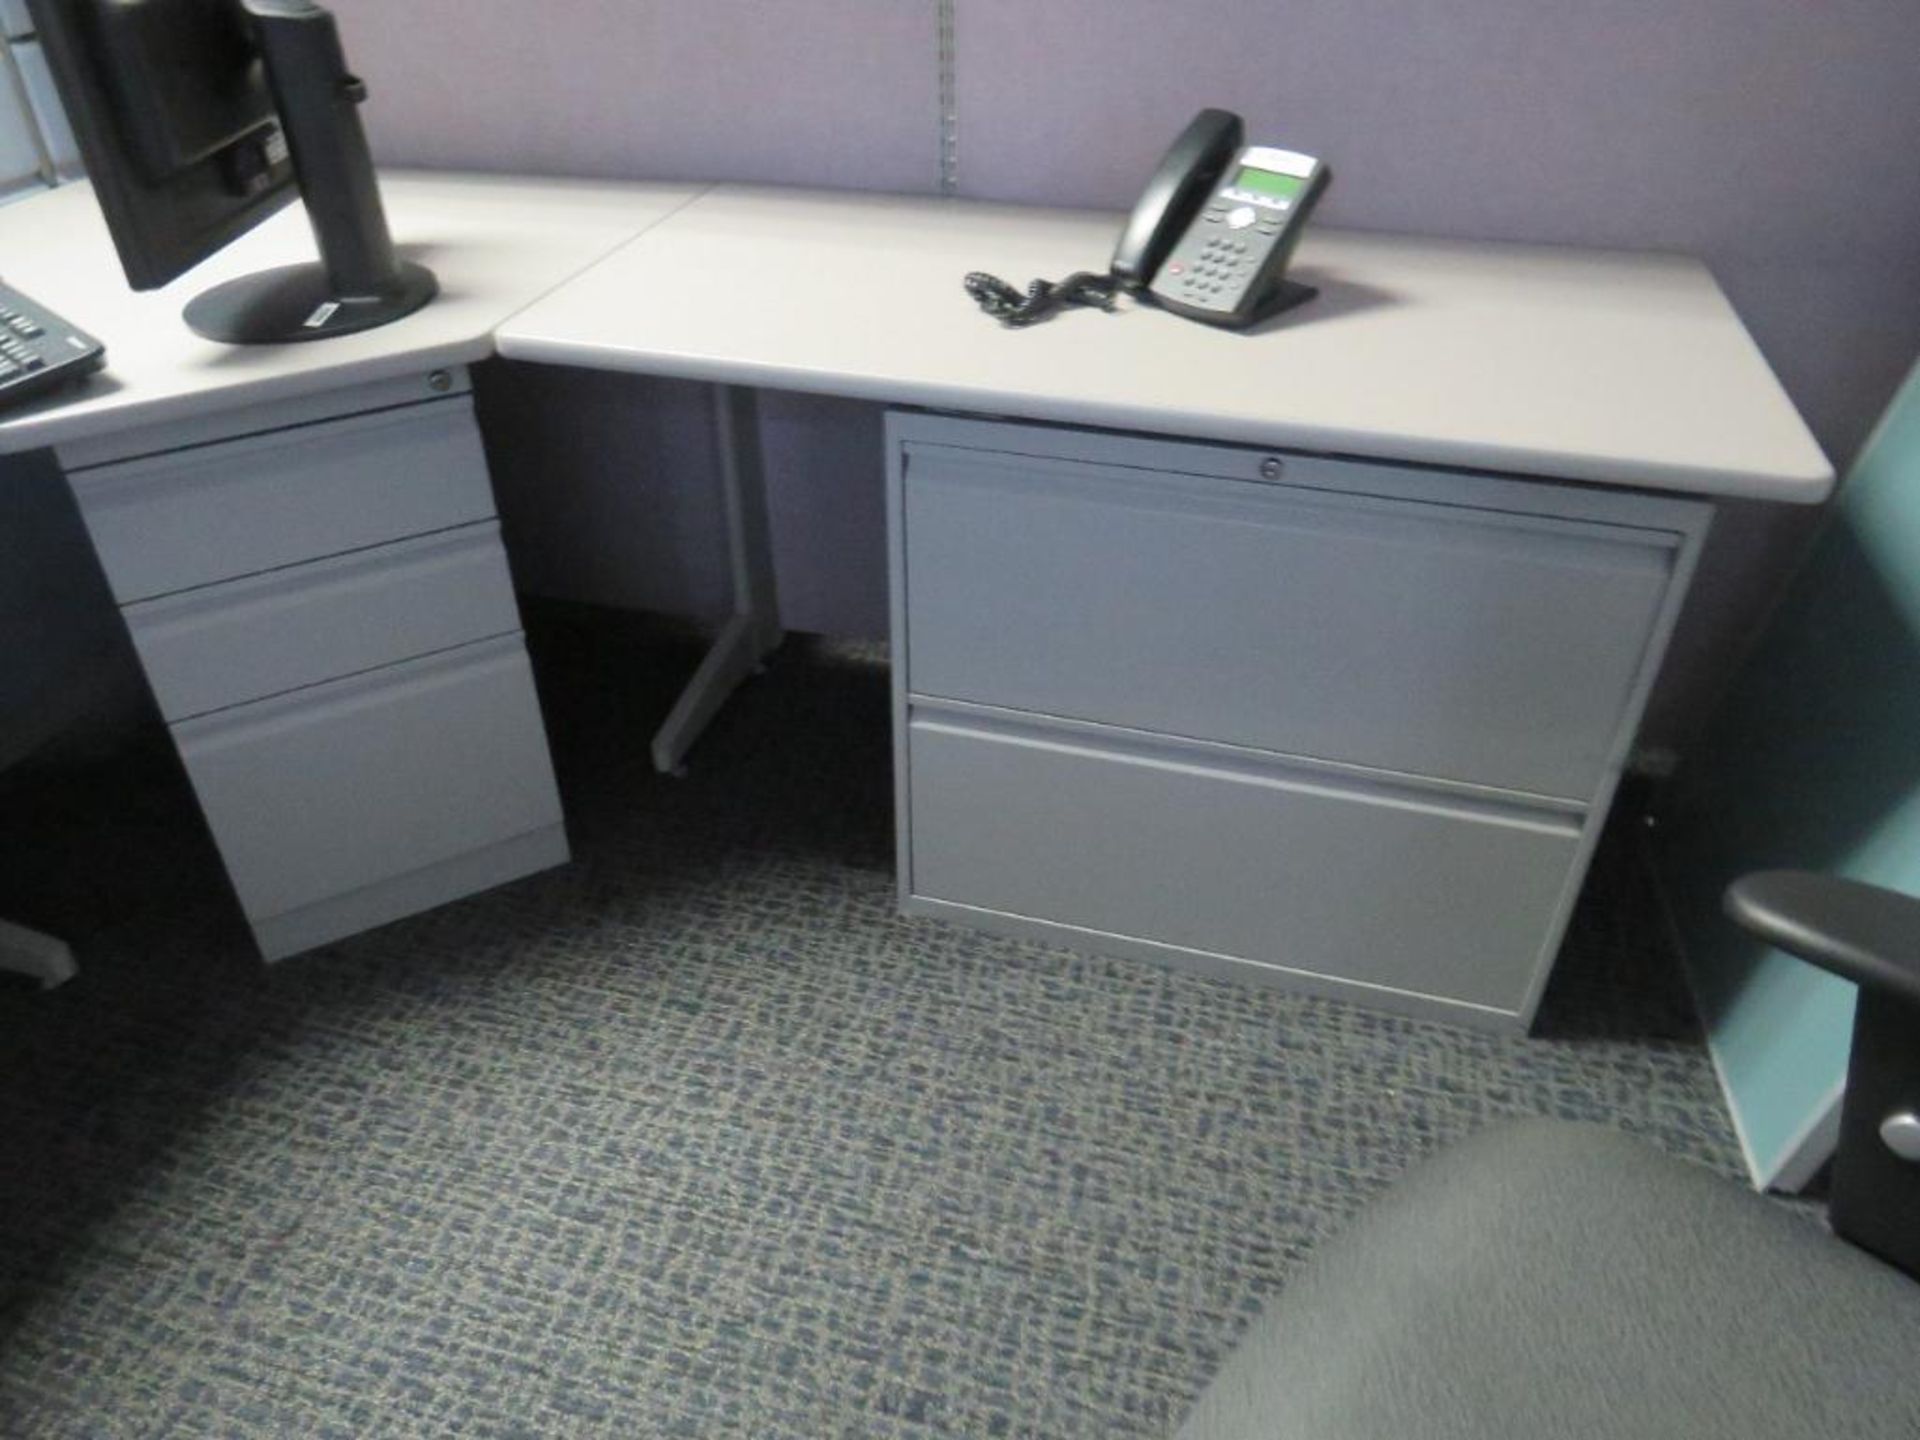 Lot c/o: Large Quantity of Assorted Under Desk File Cabinets